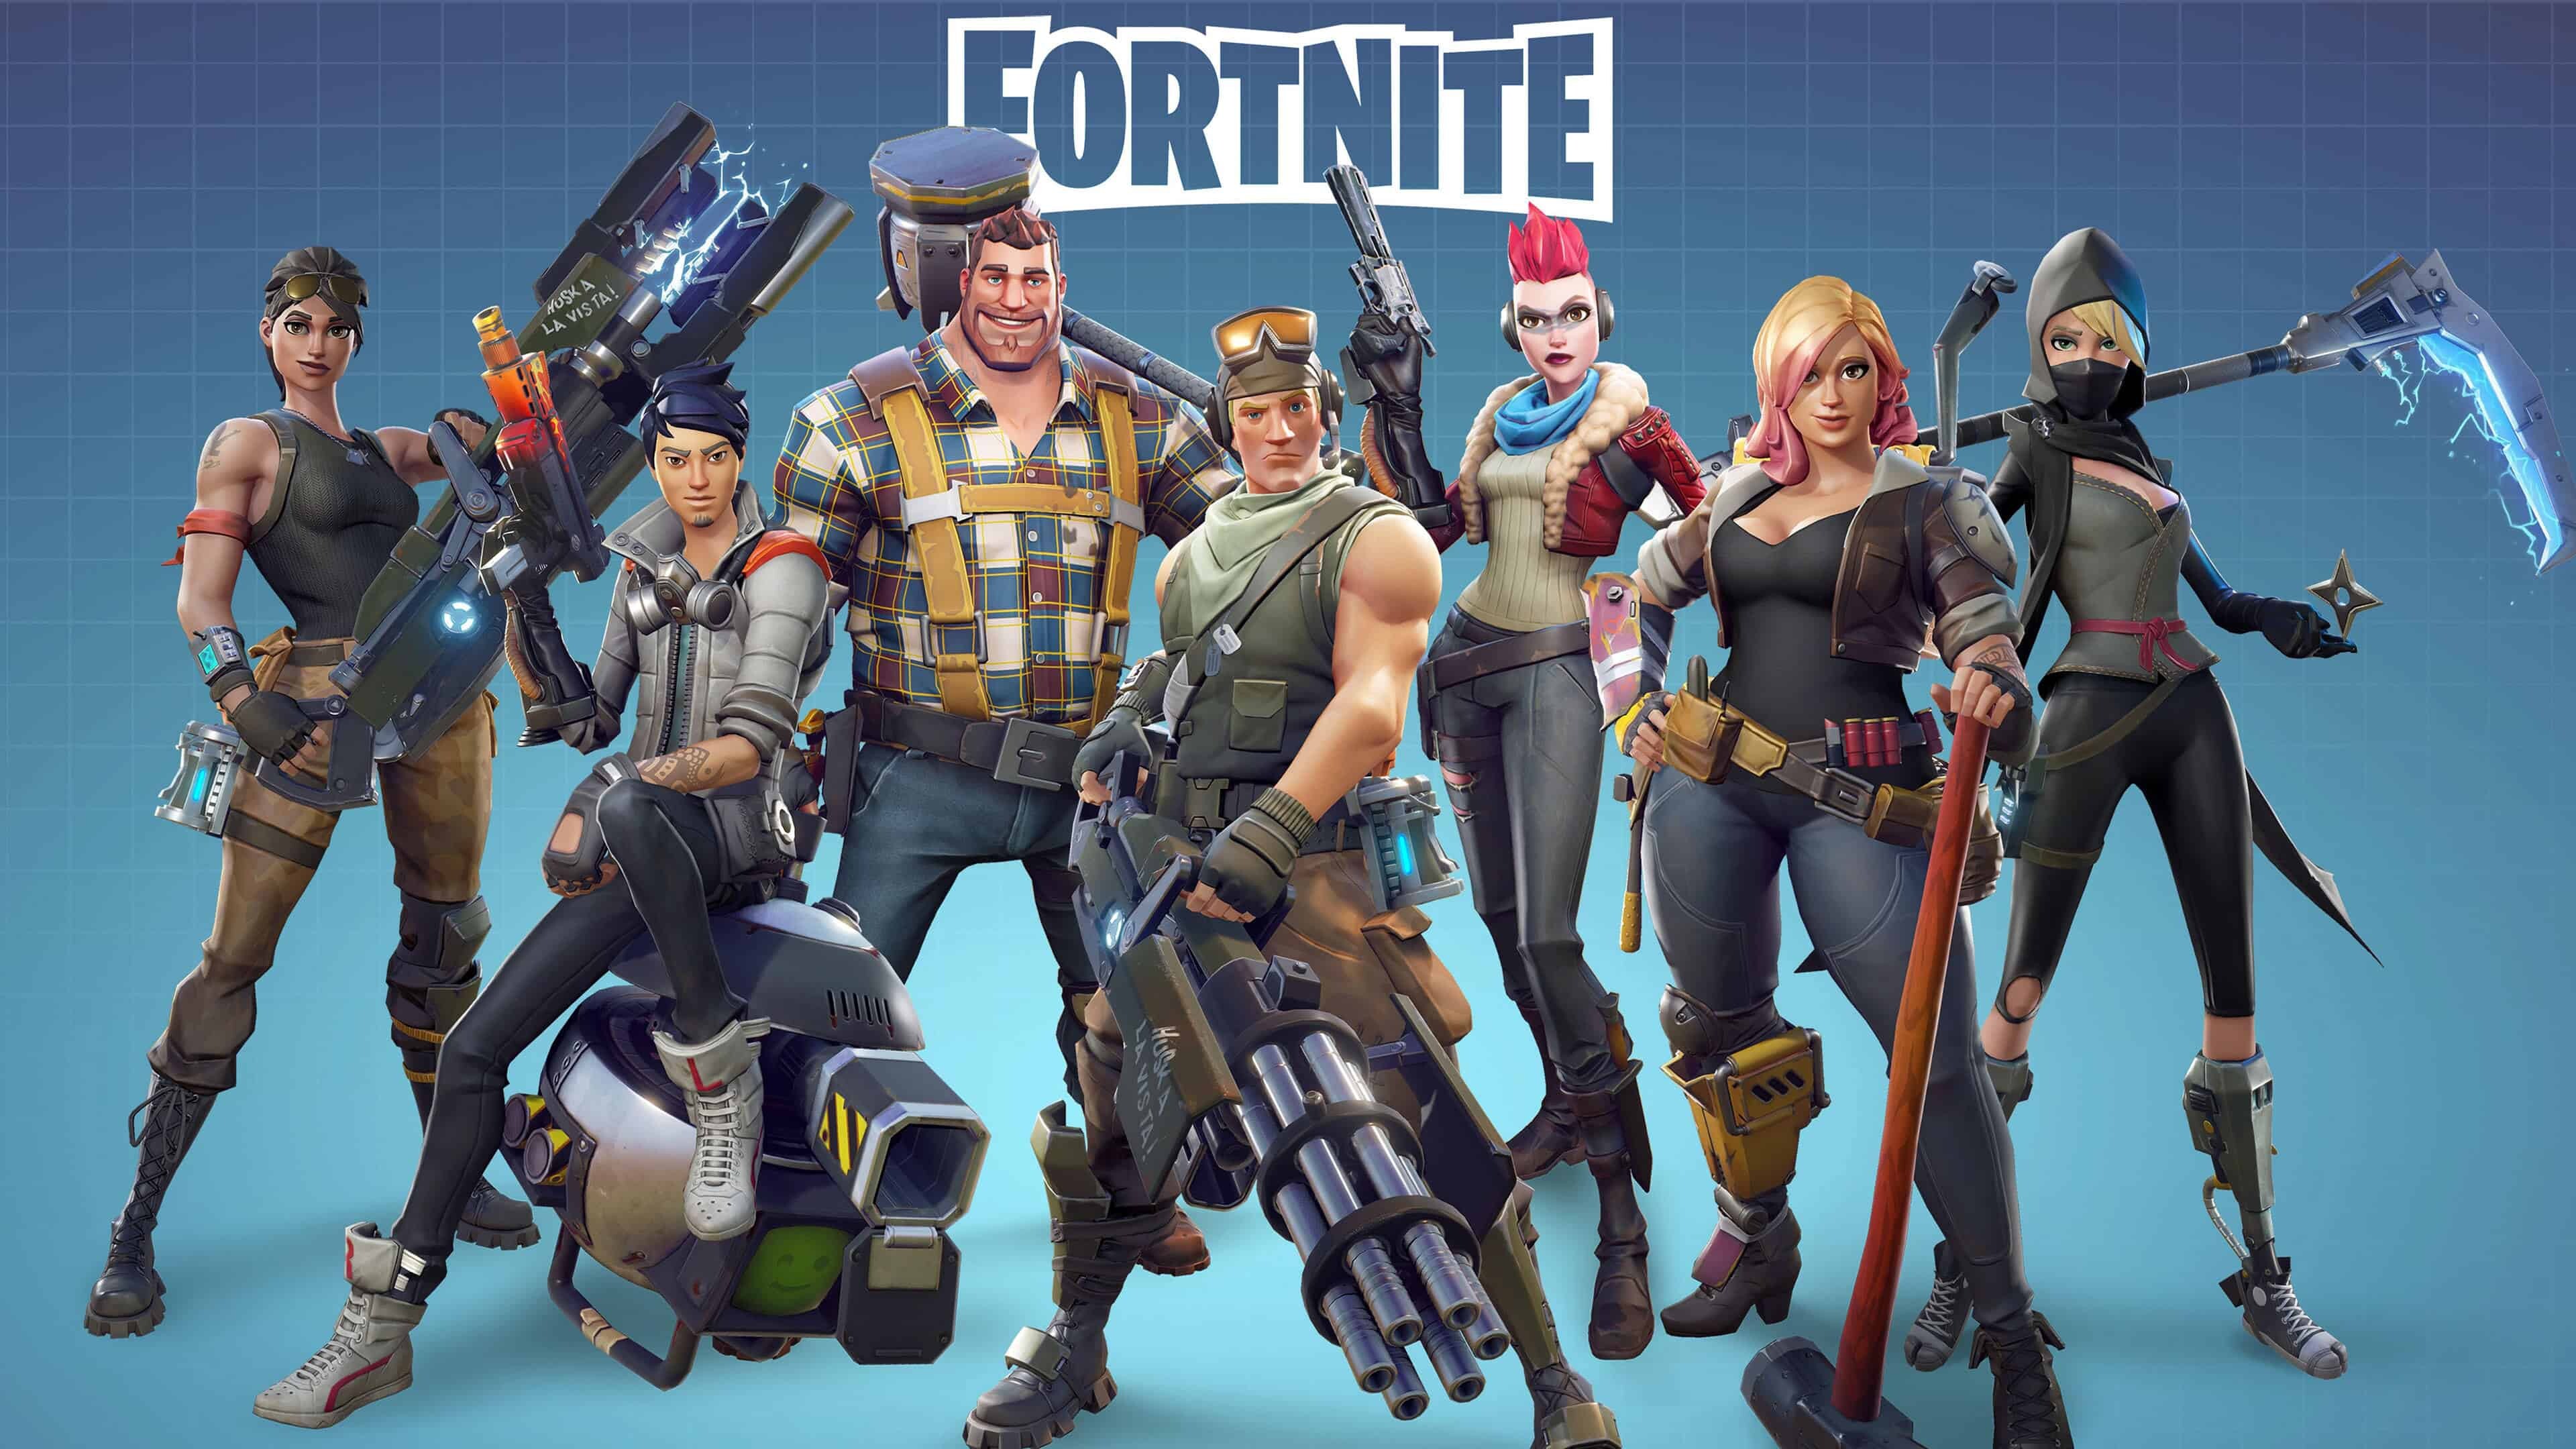 Fortnite: A massive 100-player face-off that combines looting, crafting, shootouts and chaos. 3840x2160 4K Wallpaper.